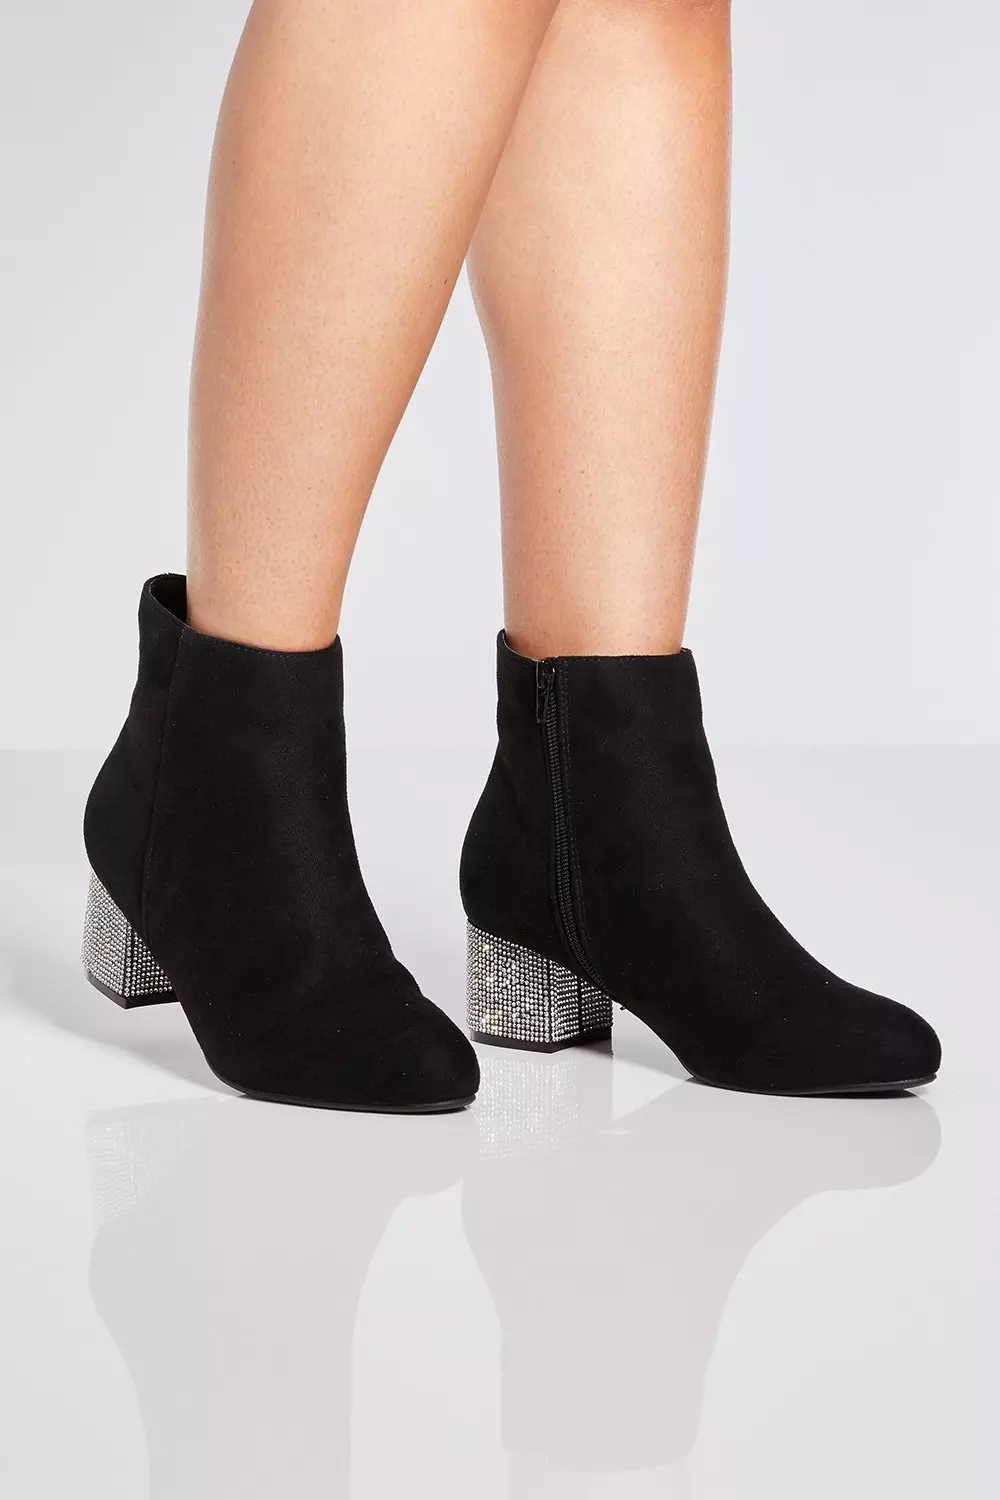 diamante ankle boots uk